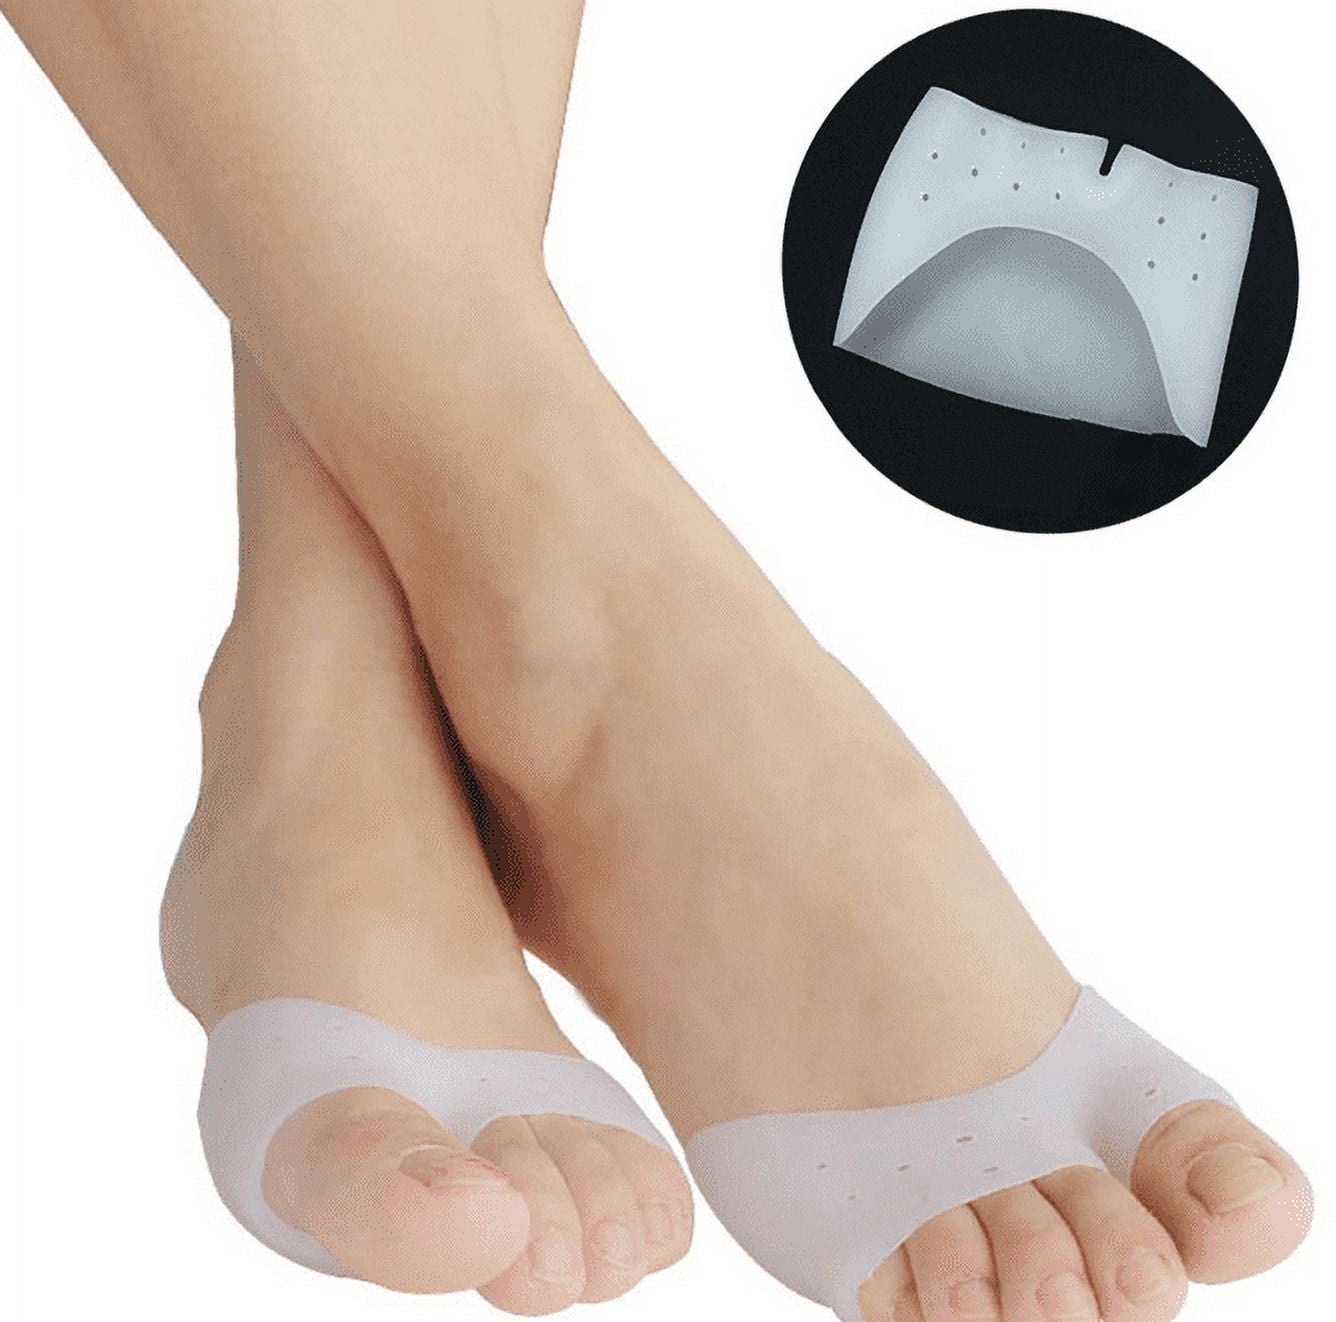 Buy MEENIRA Five Finger Forefoot Pads for Women High Heels Half Insoles Foot  Pain Care Absorbs Shock Socks Toe Pad Inserts 5 Finger Anti-Sleep Pain  Relief Forefoot Pads 1 pair Online at